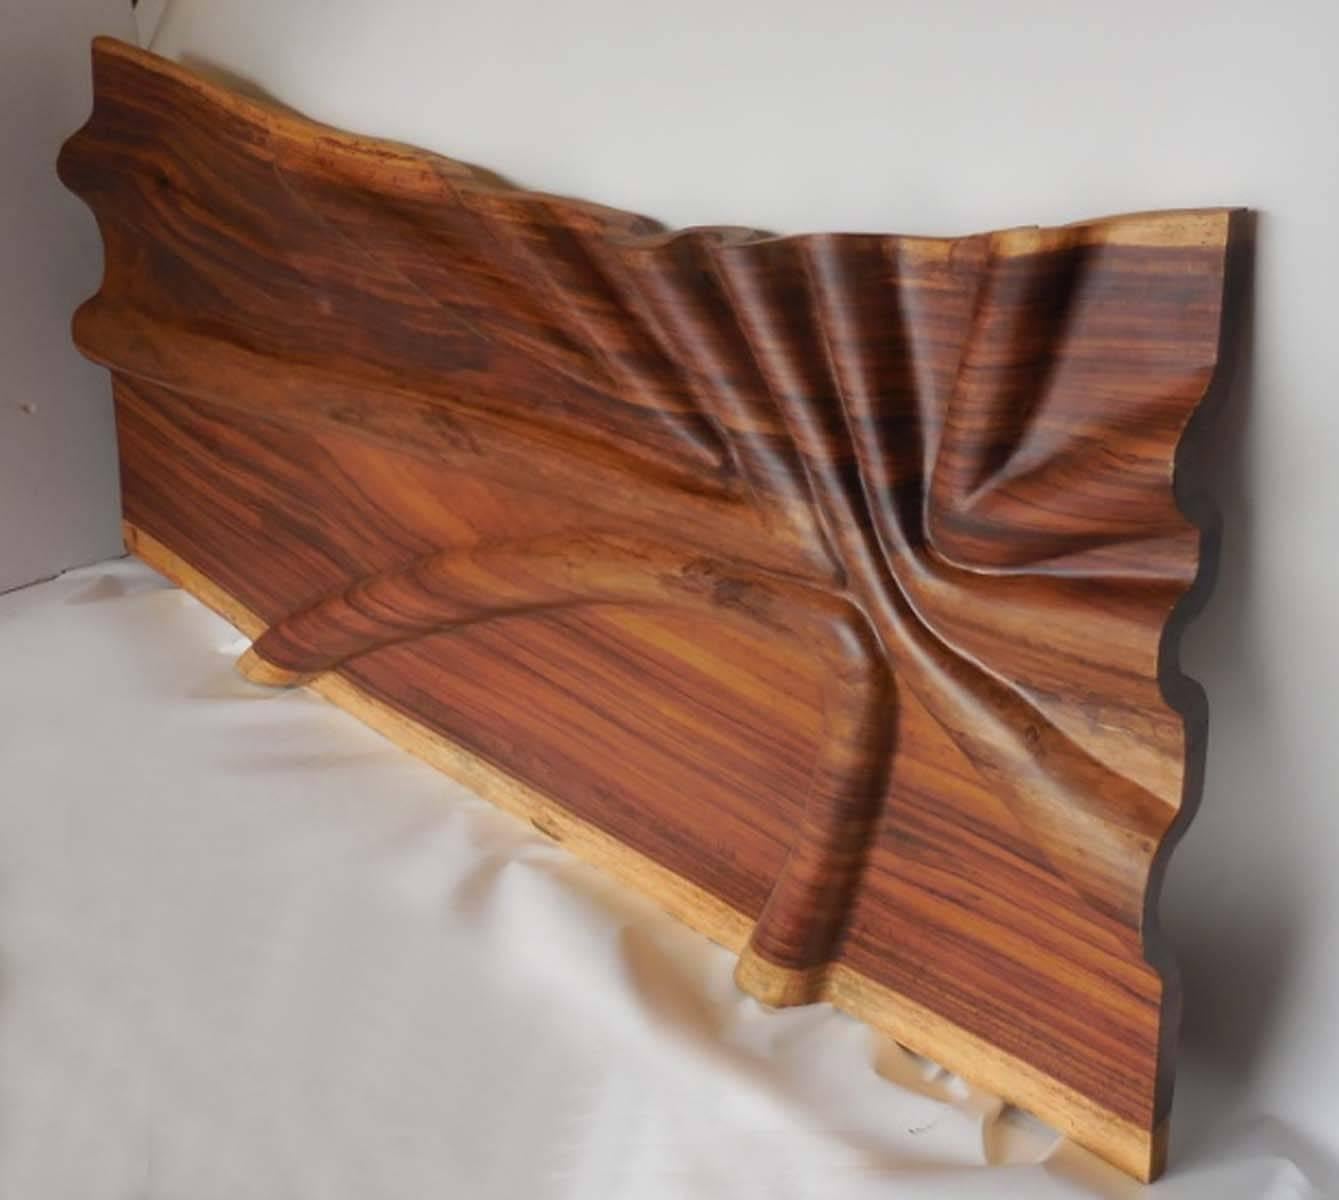 Hand-carved tropical wood sculpture or headboard with undulating design. Live edge conacaste wood with natural variegated graining and colors, from light to dark. Slab is 1.5 inch thick and undulates to a total depth of four inches at some places.